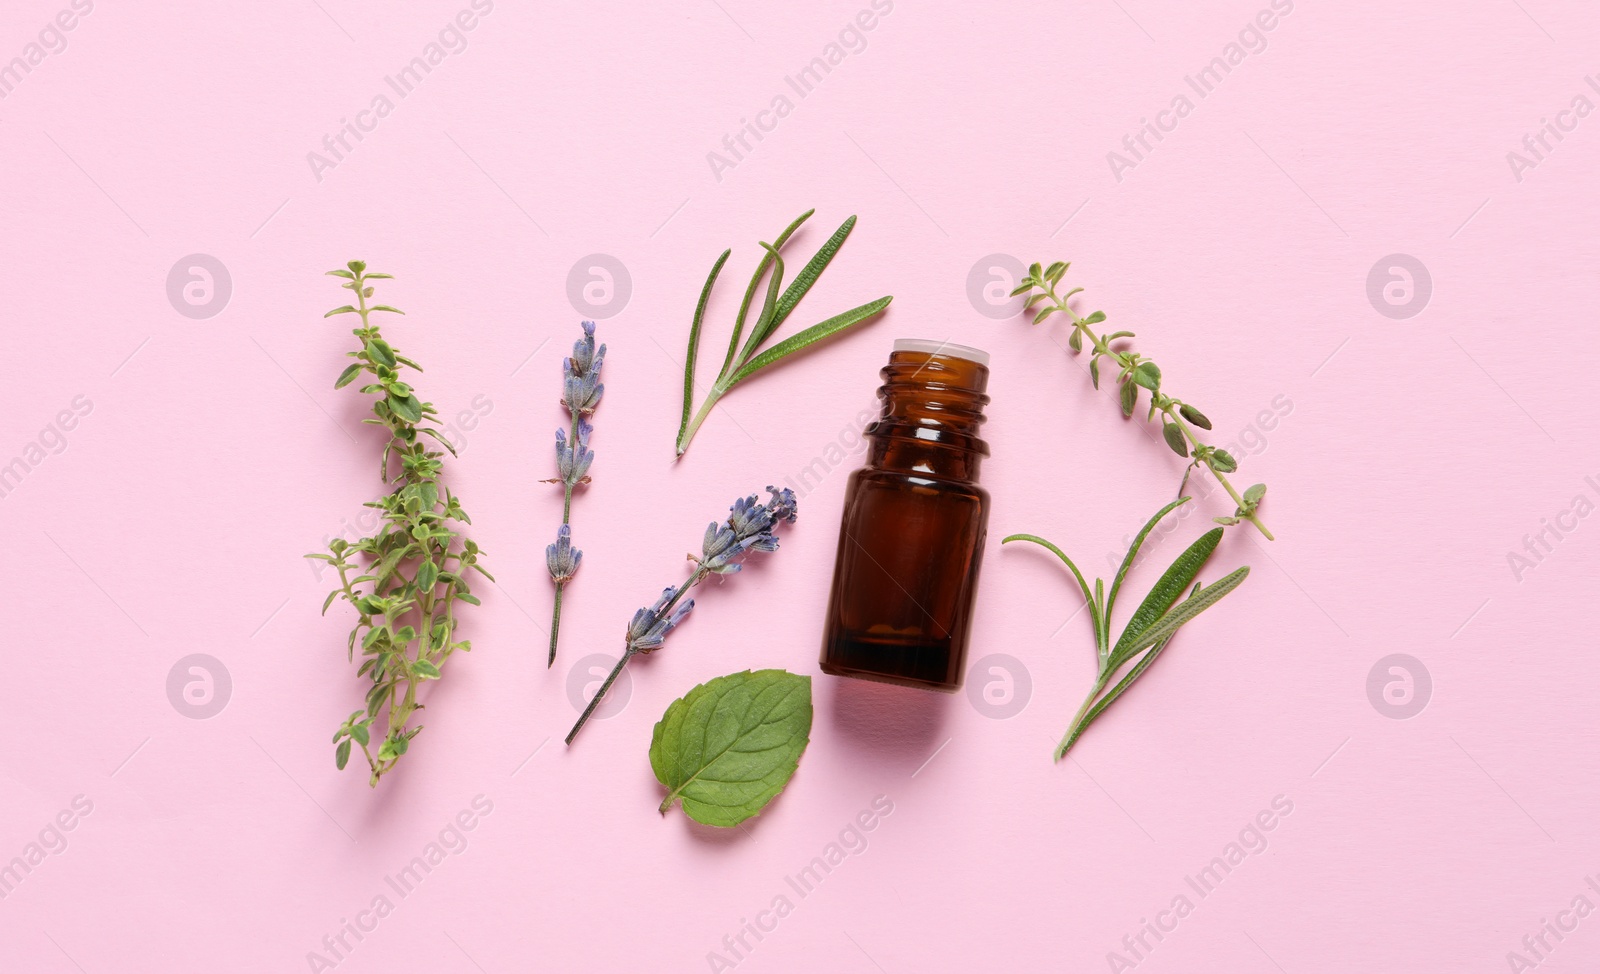 Photo of Bottle of essential oil, different herbs and lavender flowers on pink background, flat lay